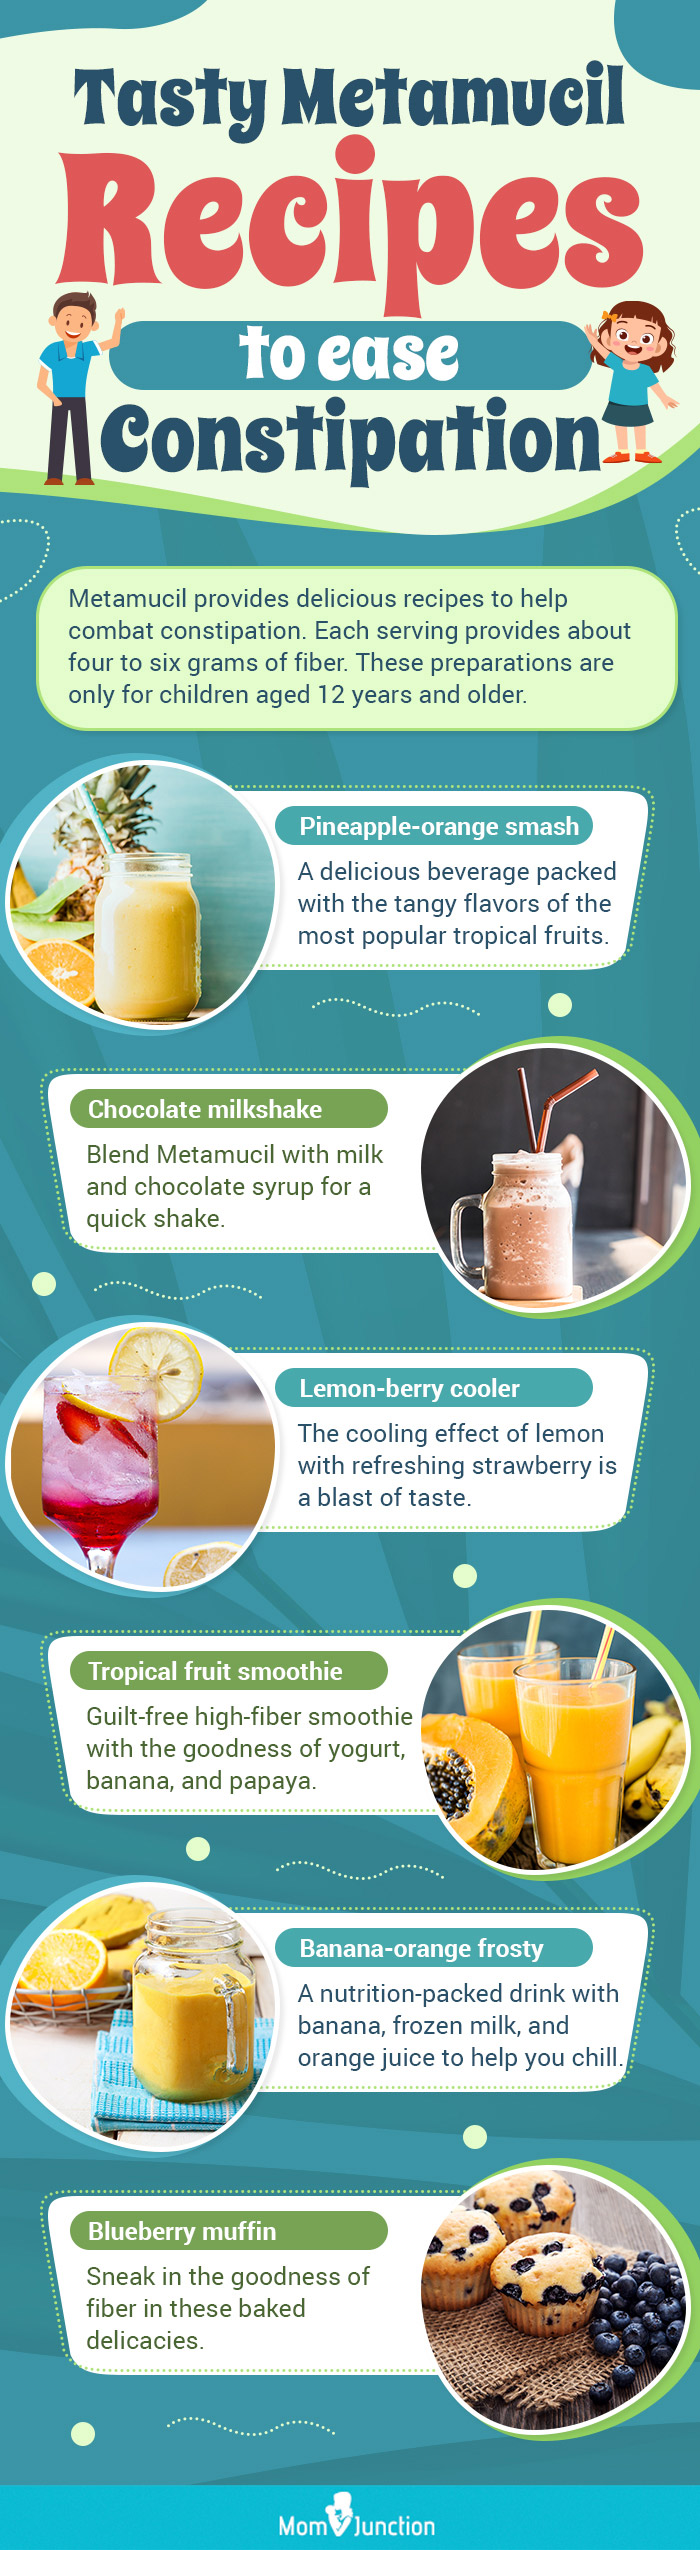 metamucil recipes to ease constipation in a tasty way (infographic)